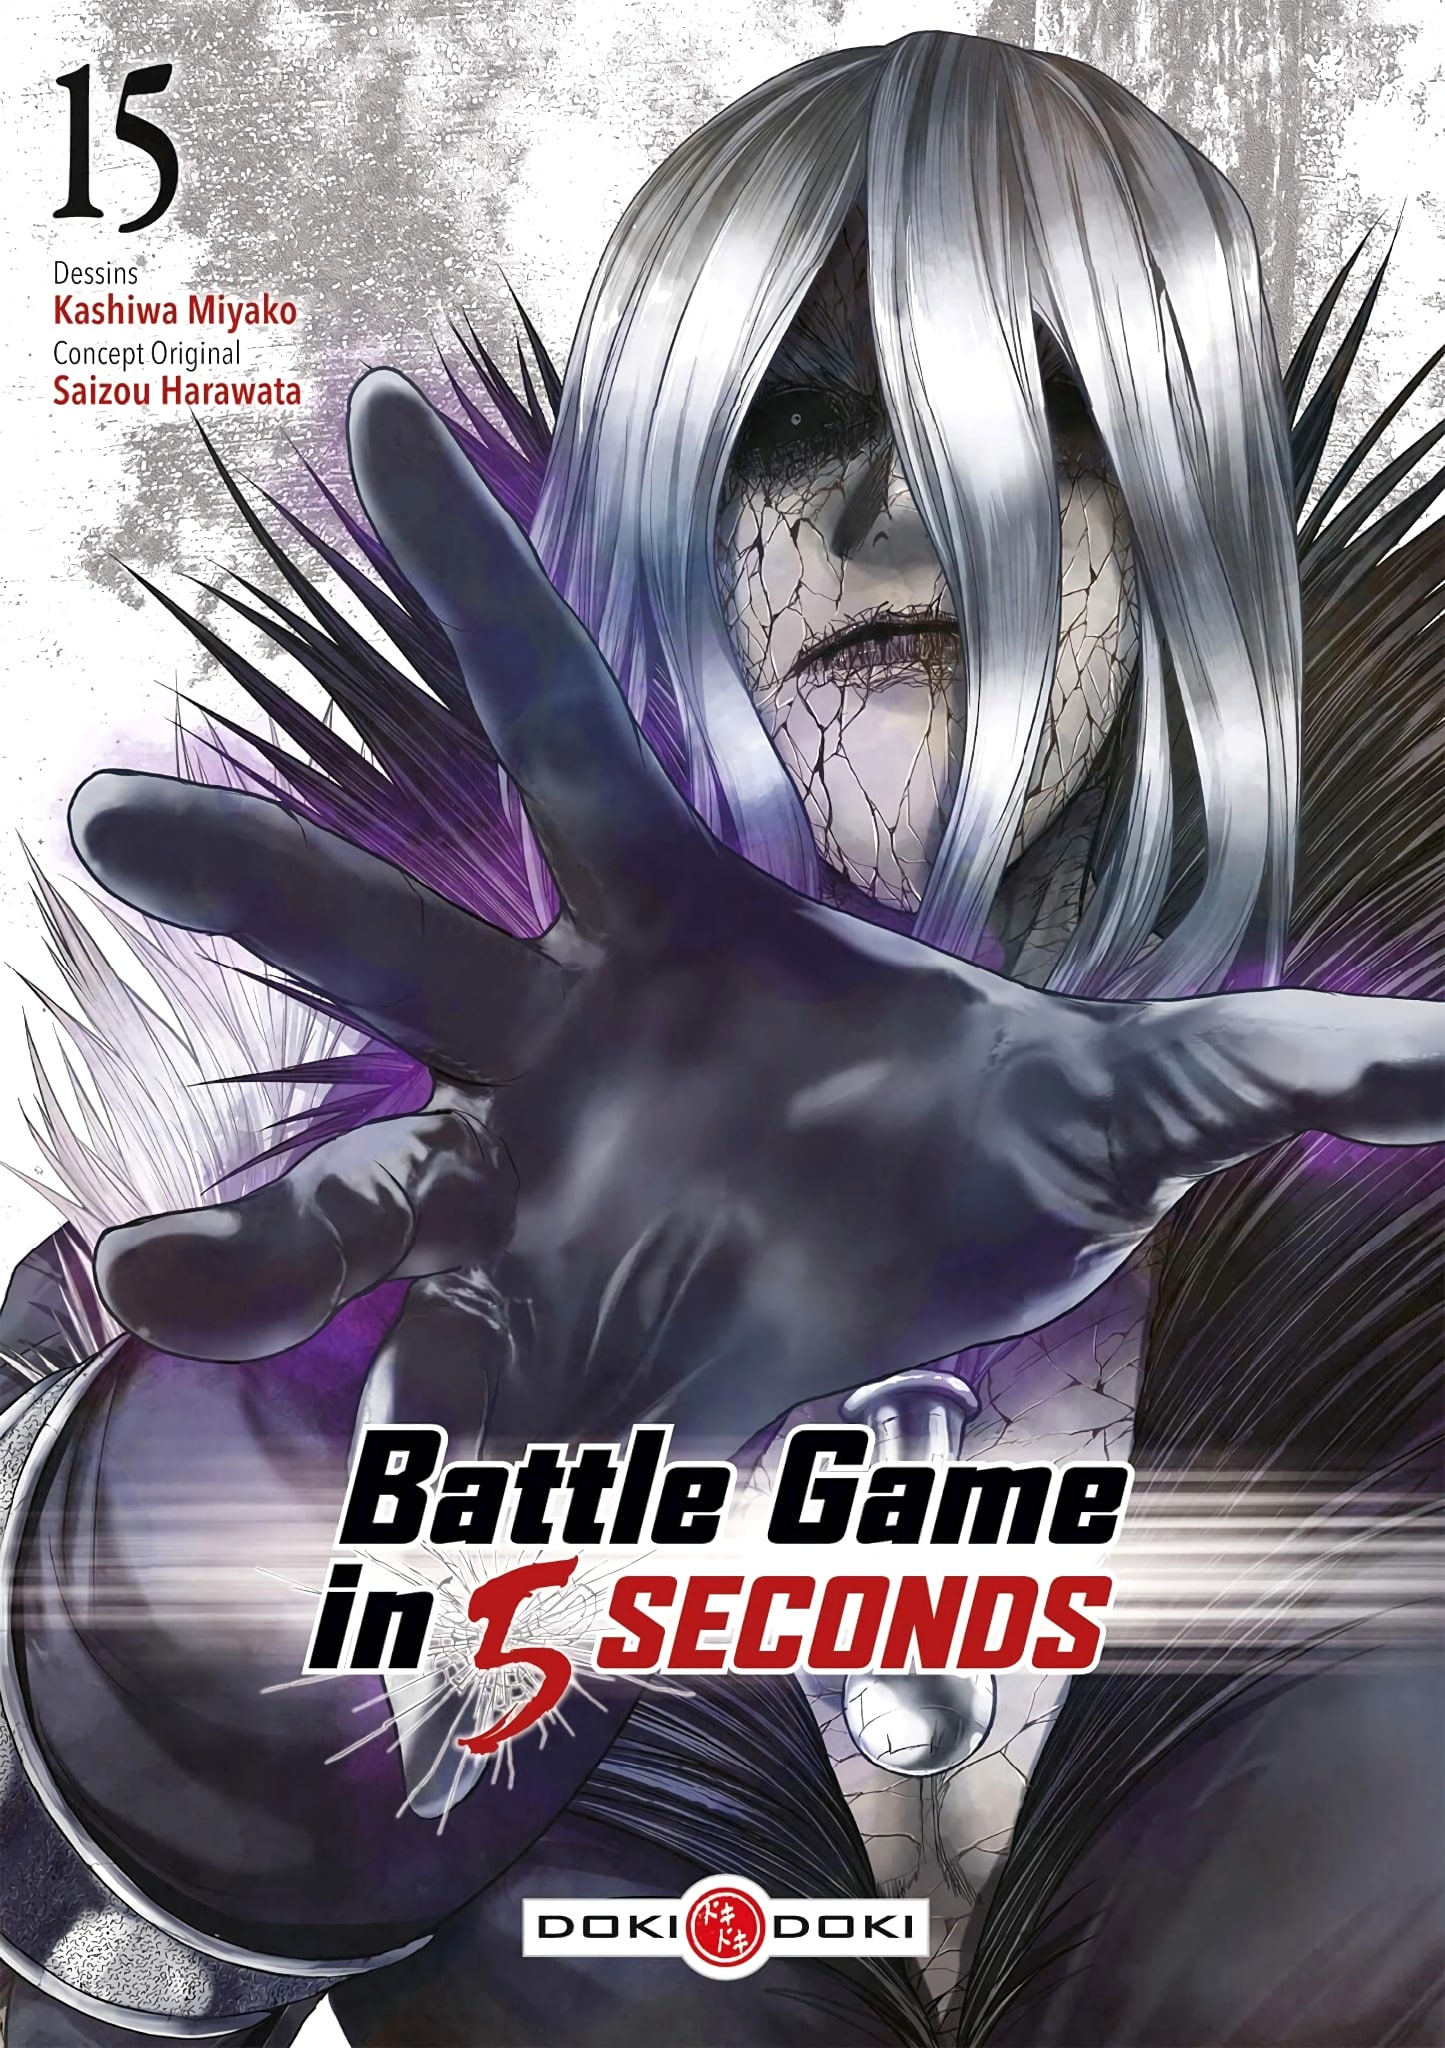 Tome 15 du manga Battle Game in 5 Seconds